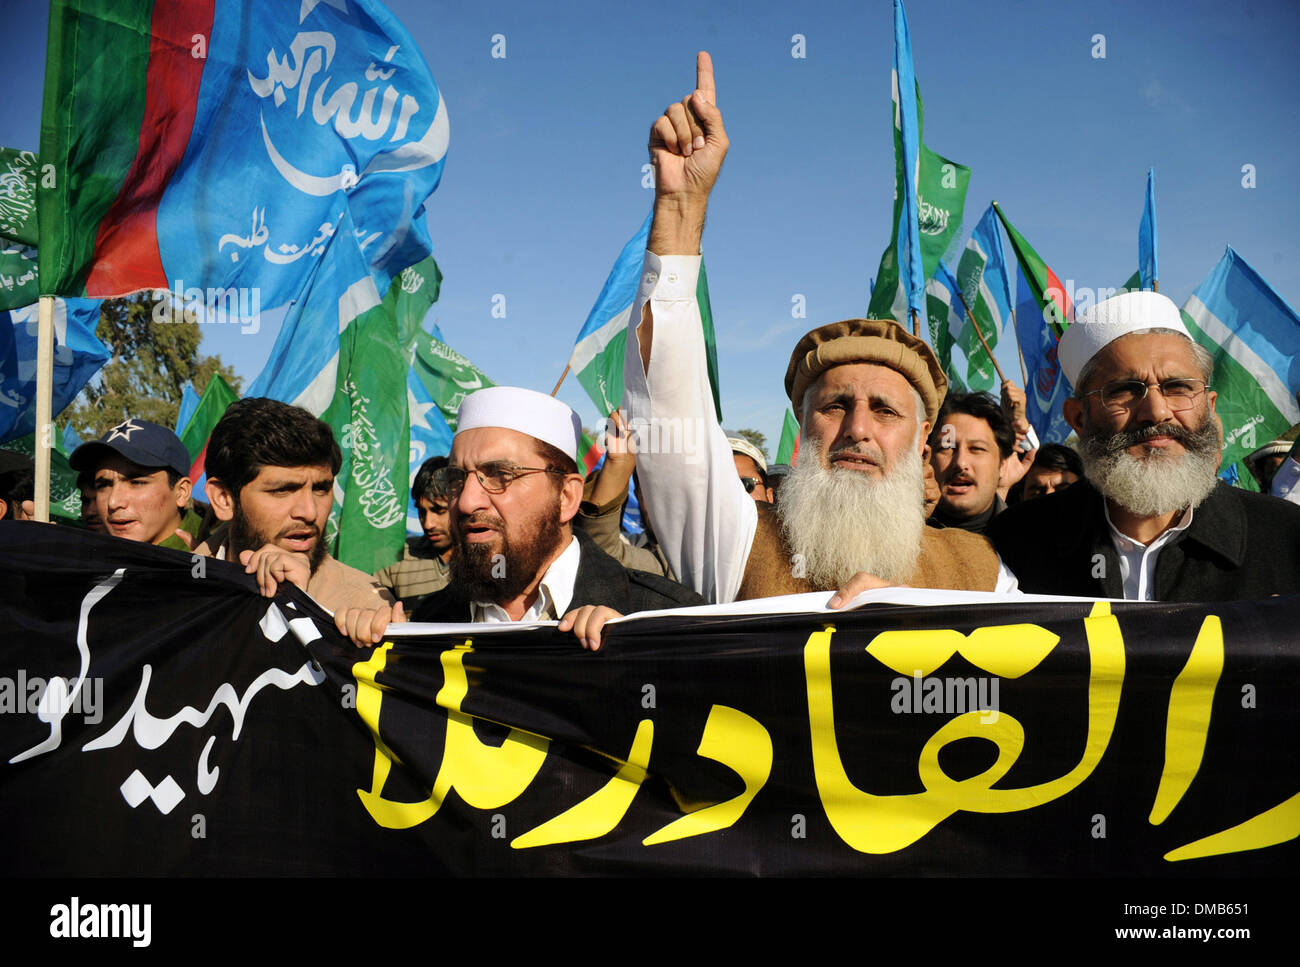 Peshawar, Pakistan. 13th Dec, 2013. Activists of the Jamaat-e-Islami party shout slogans for Bangladeshi Islamist leader Abdul Quader Molla a day after his execution, in northwest Pakistan' s Peshawar on Dec. 13, 2013. Bangladesh has executed Abdul Quader Molla, an Islamist party leader convicted of war crimes in 1971, which is the first execution of a war criminal in the country. In protest against Molla's execution, his party Jamaat called countrywide dawn-to-dusk general strike for Sunday. Credit:  Ahmad Sidique/Xinhua/Alamy Live News Stock Photo